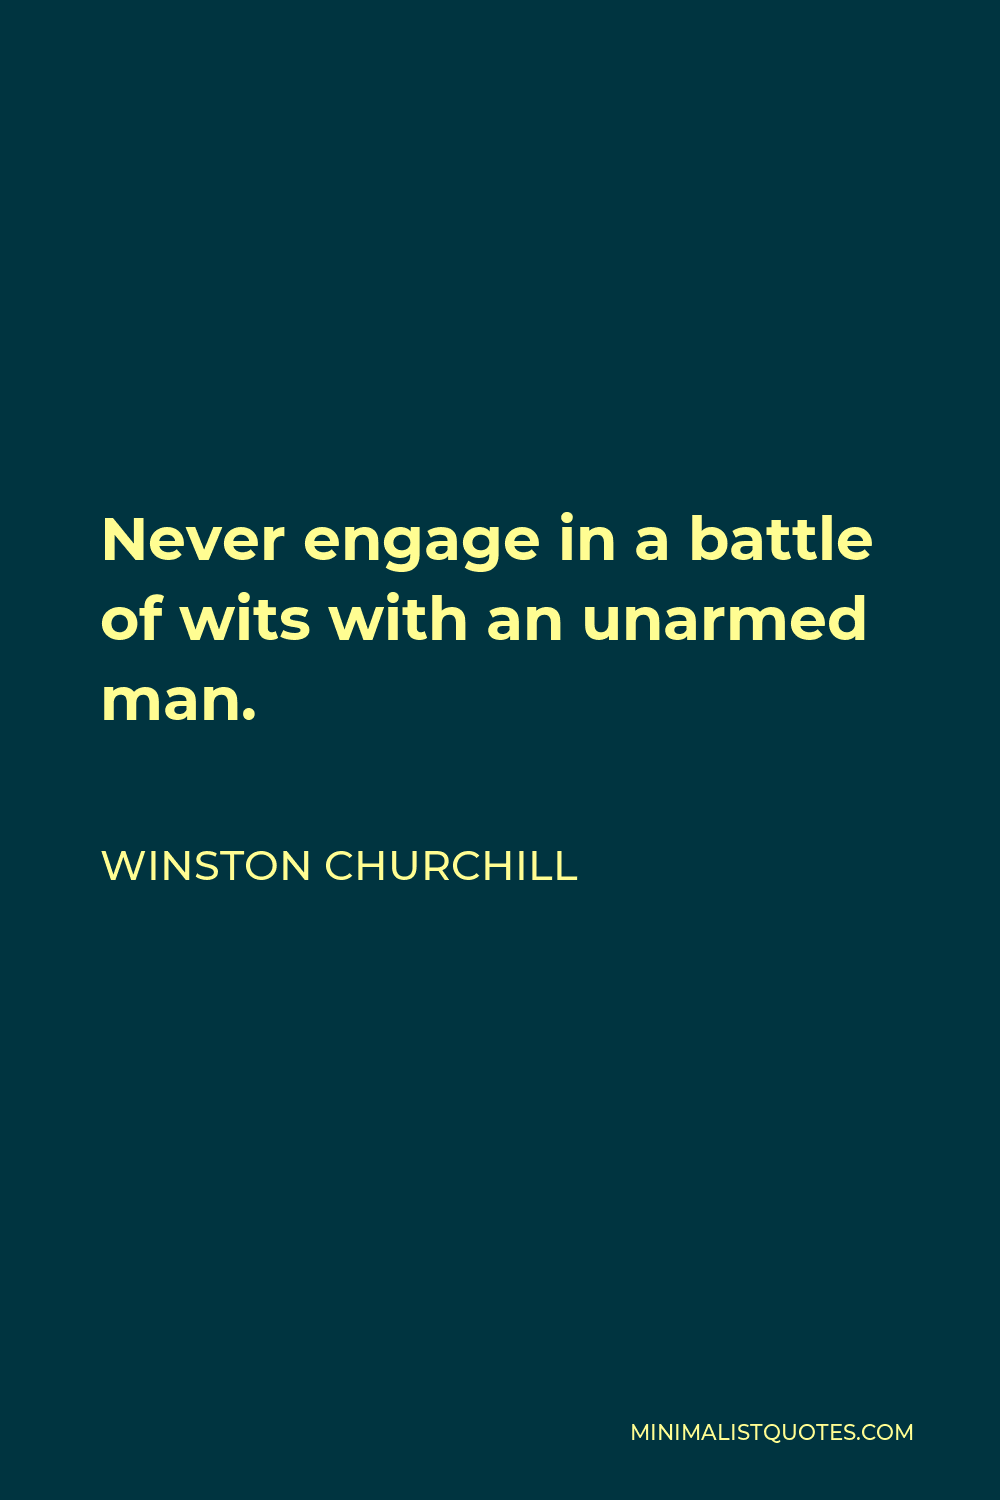 Winston Churchill Quote - Never engage in a battle of wits with an unarmed man.